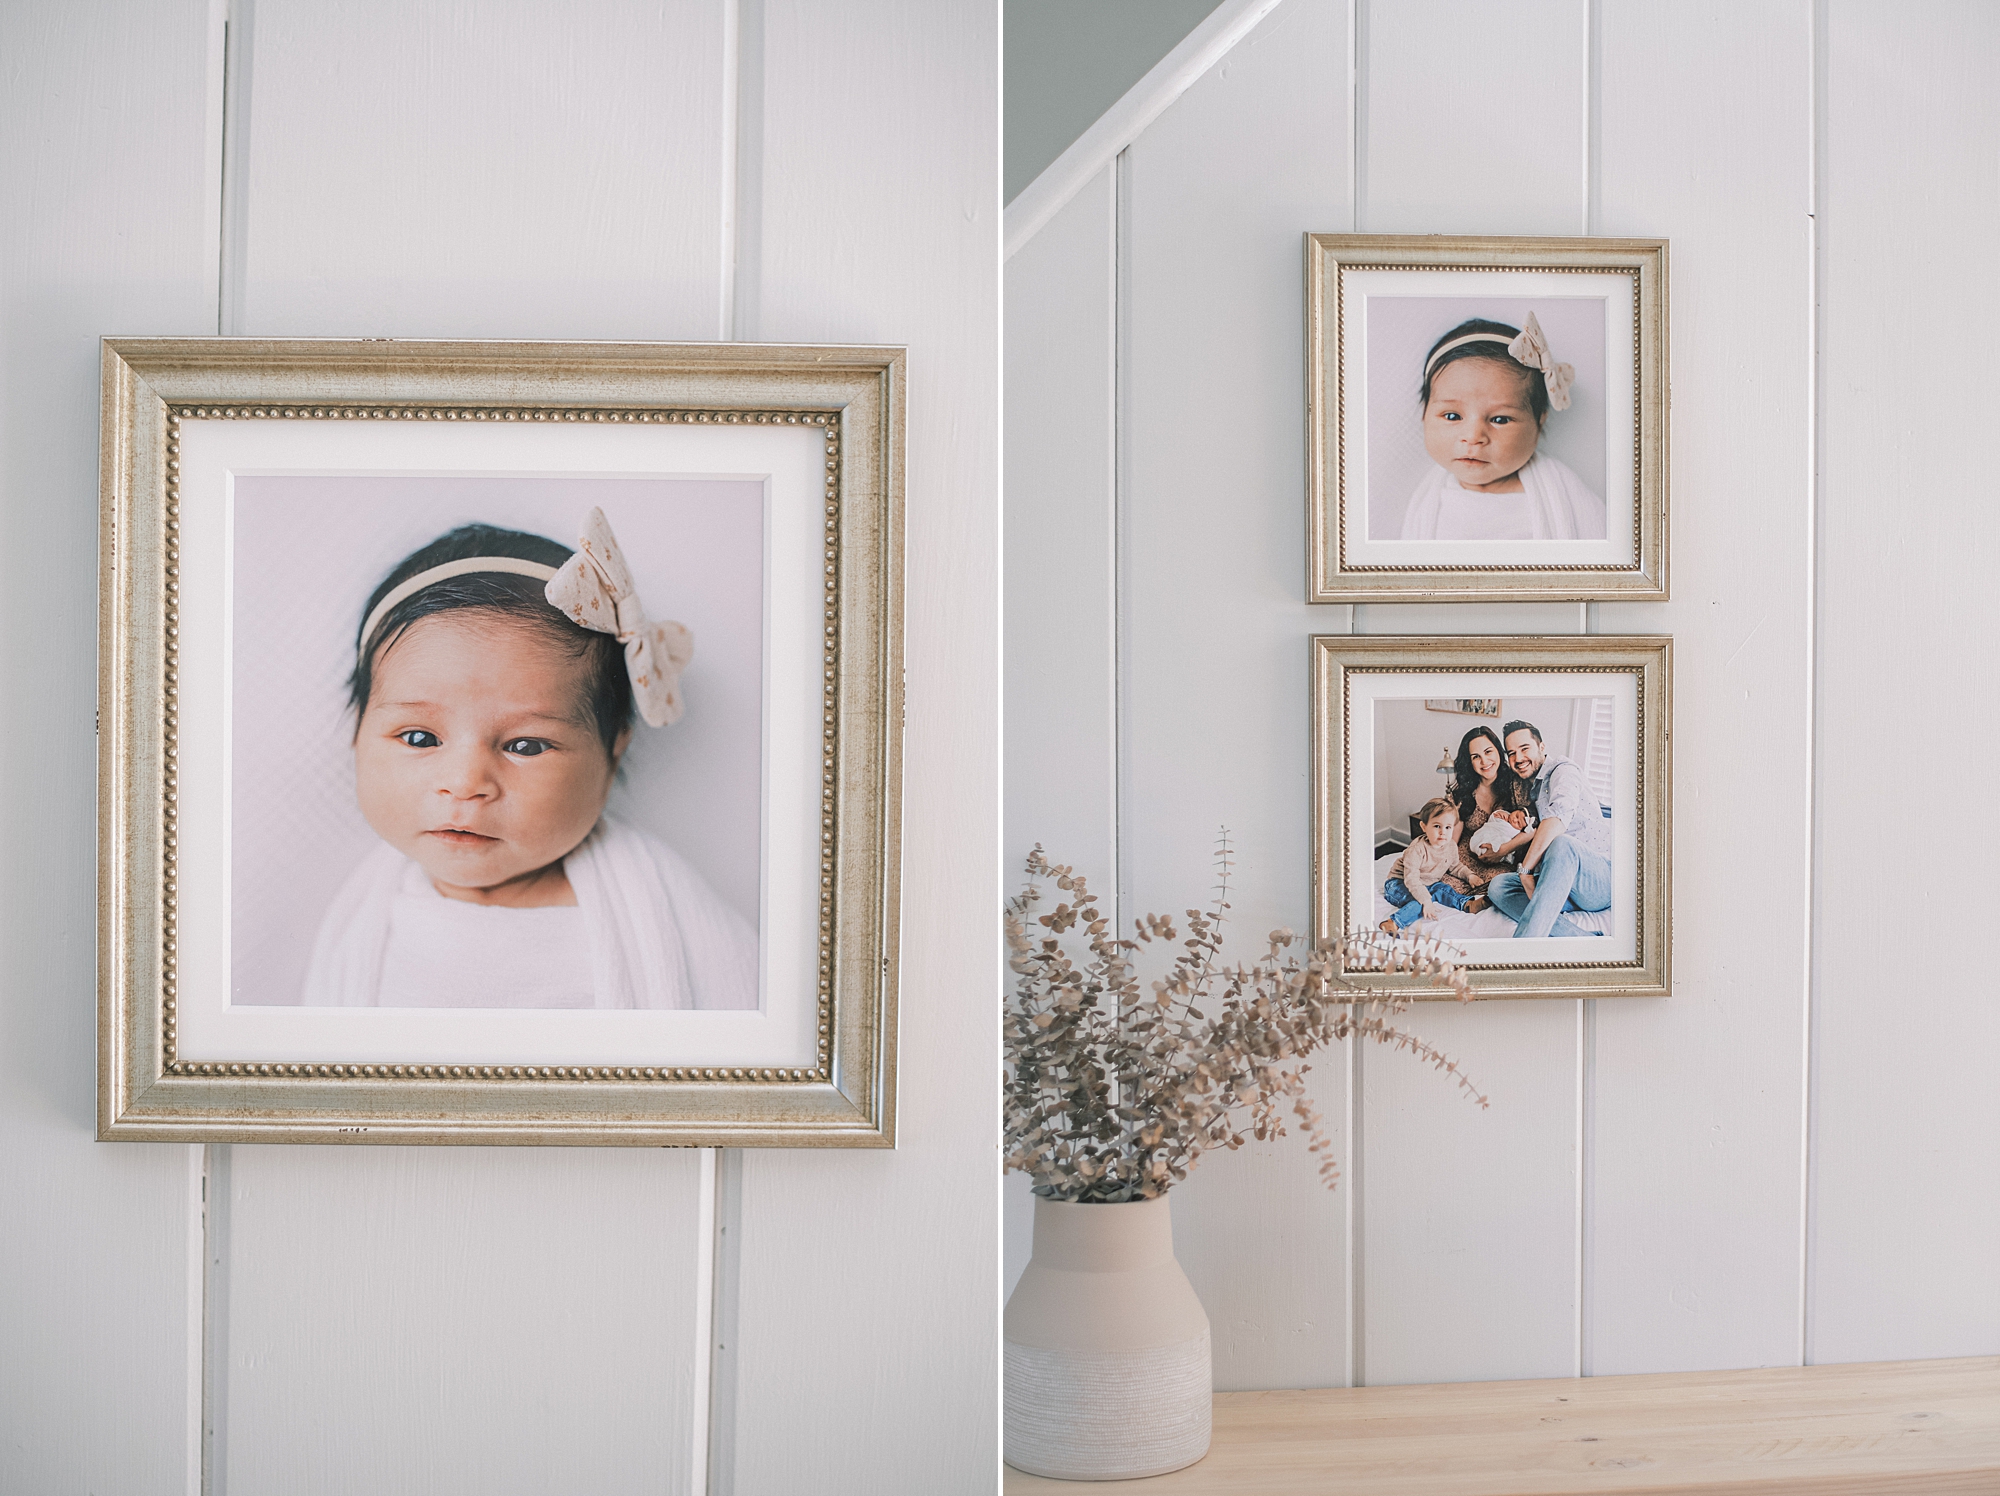 2 Framed prints of a newborn baby girl and family displayed on a wall by in home newborn photographer Samantha Jay